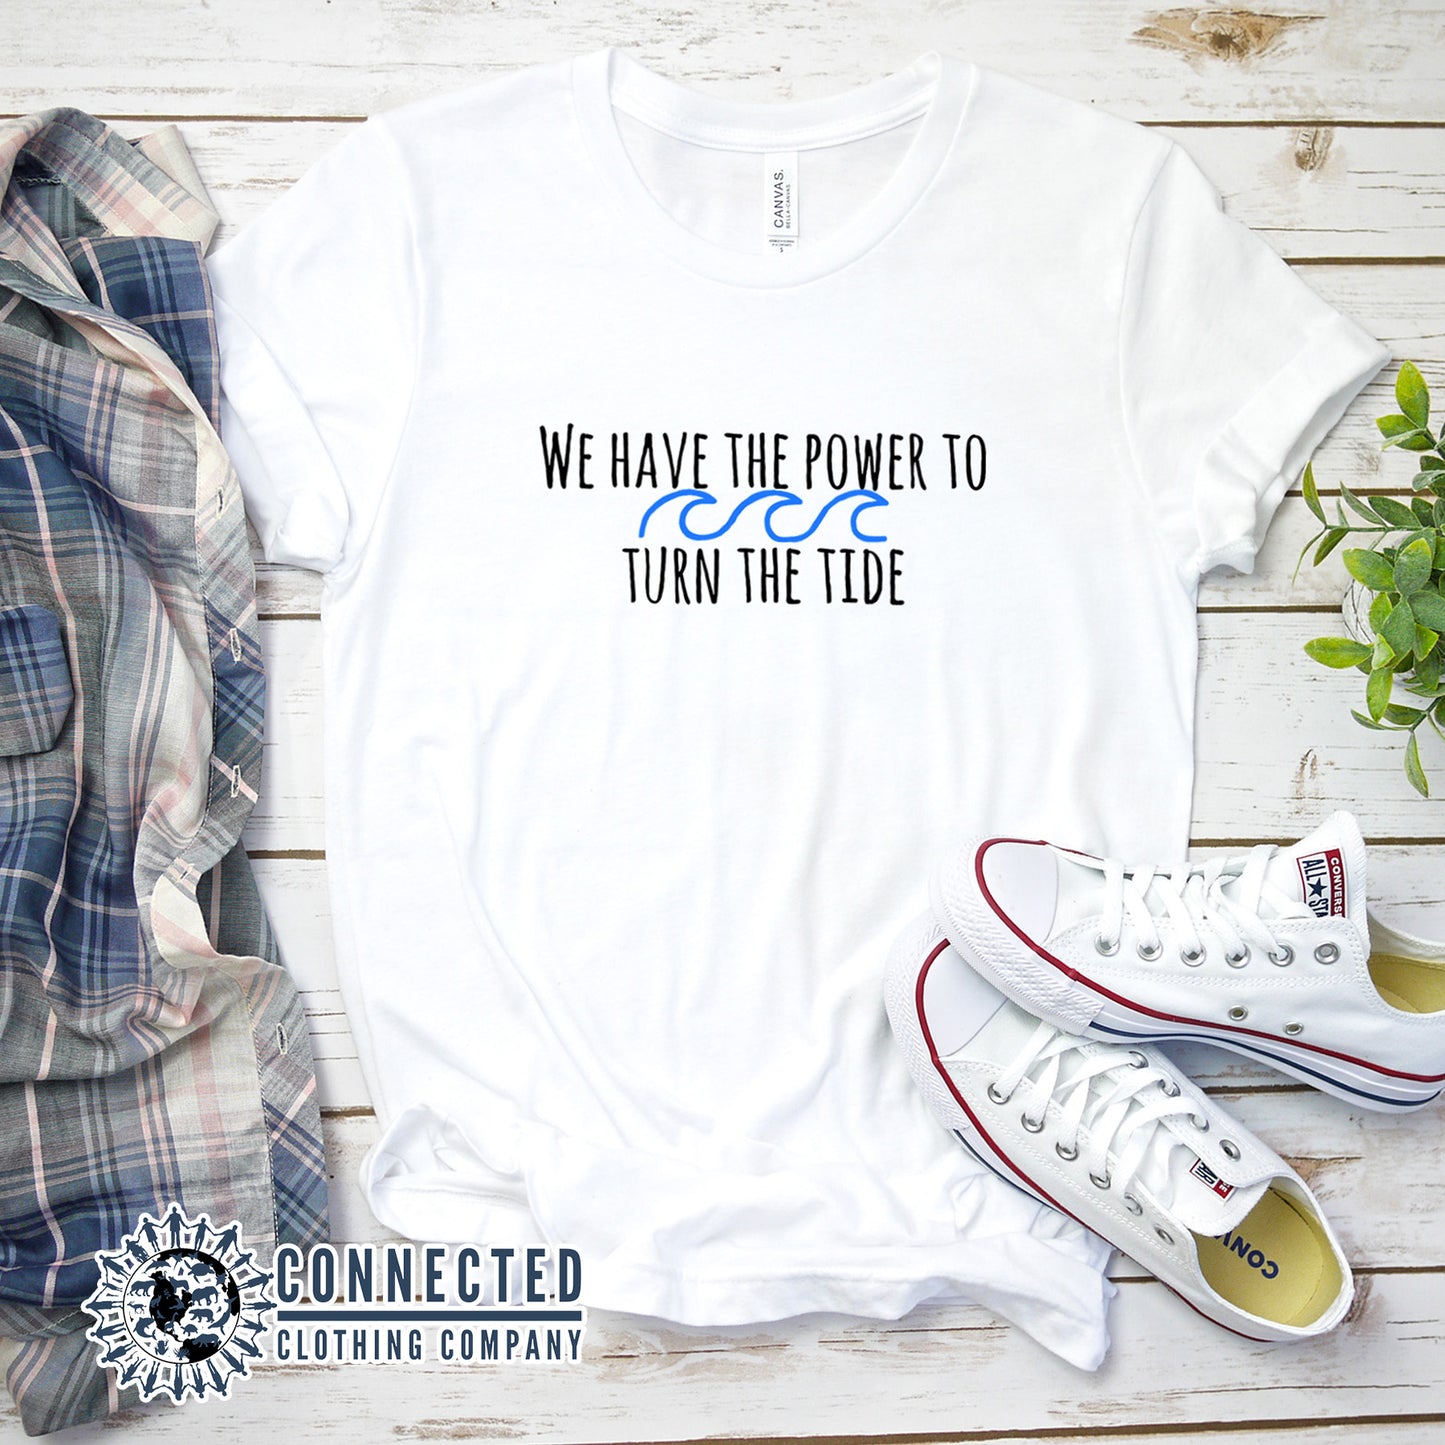 White Turn The Tide Short-Sleeve Tee reads  "We have the power to turn the tide." - sweetsherriloudesigns - Ethically and Sustainably Made - 10% donated to Mission Blue ocean conservation